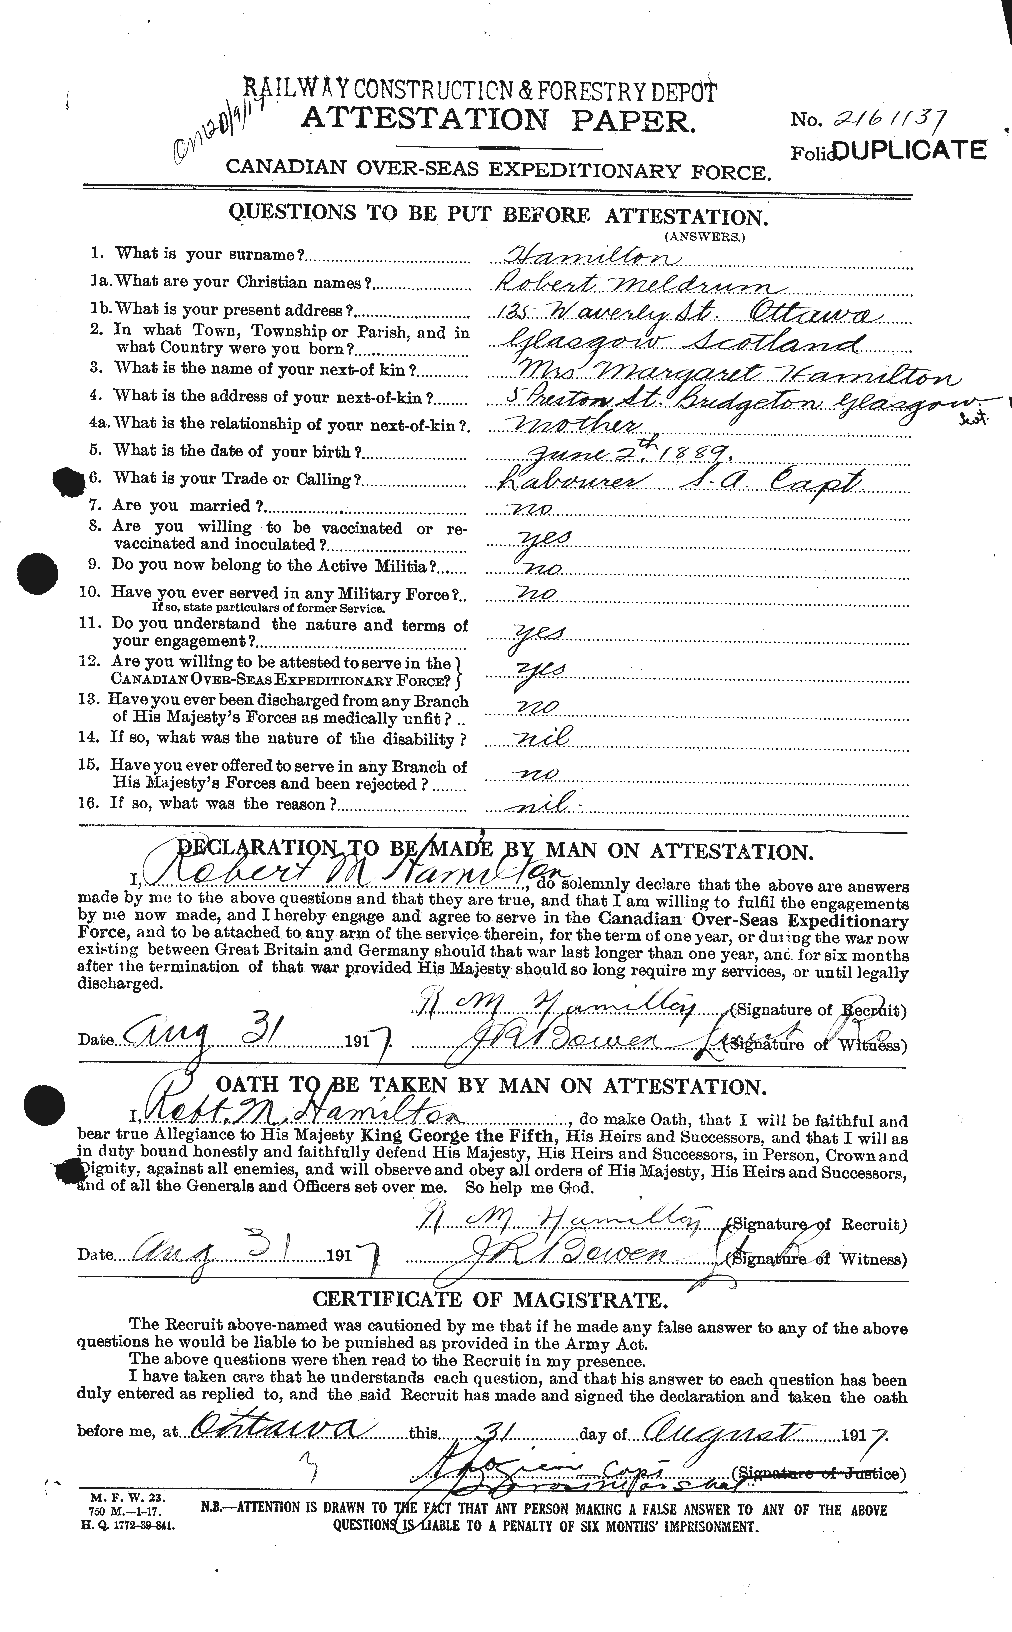 Personnel Records of the First World War - CEF 373267a